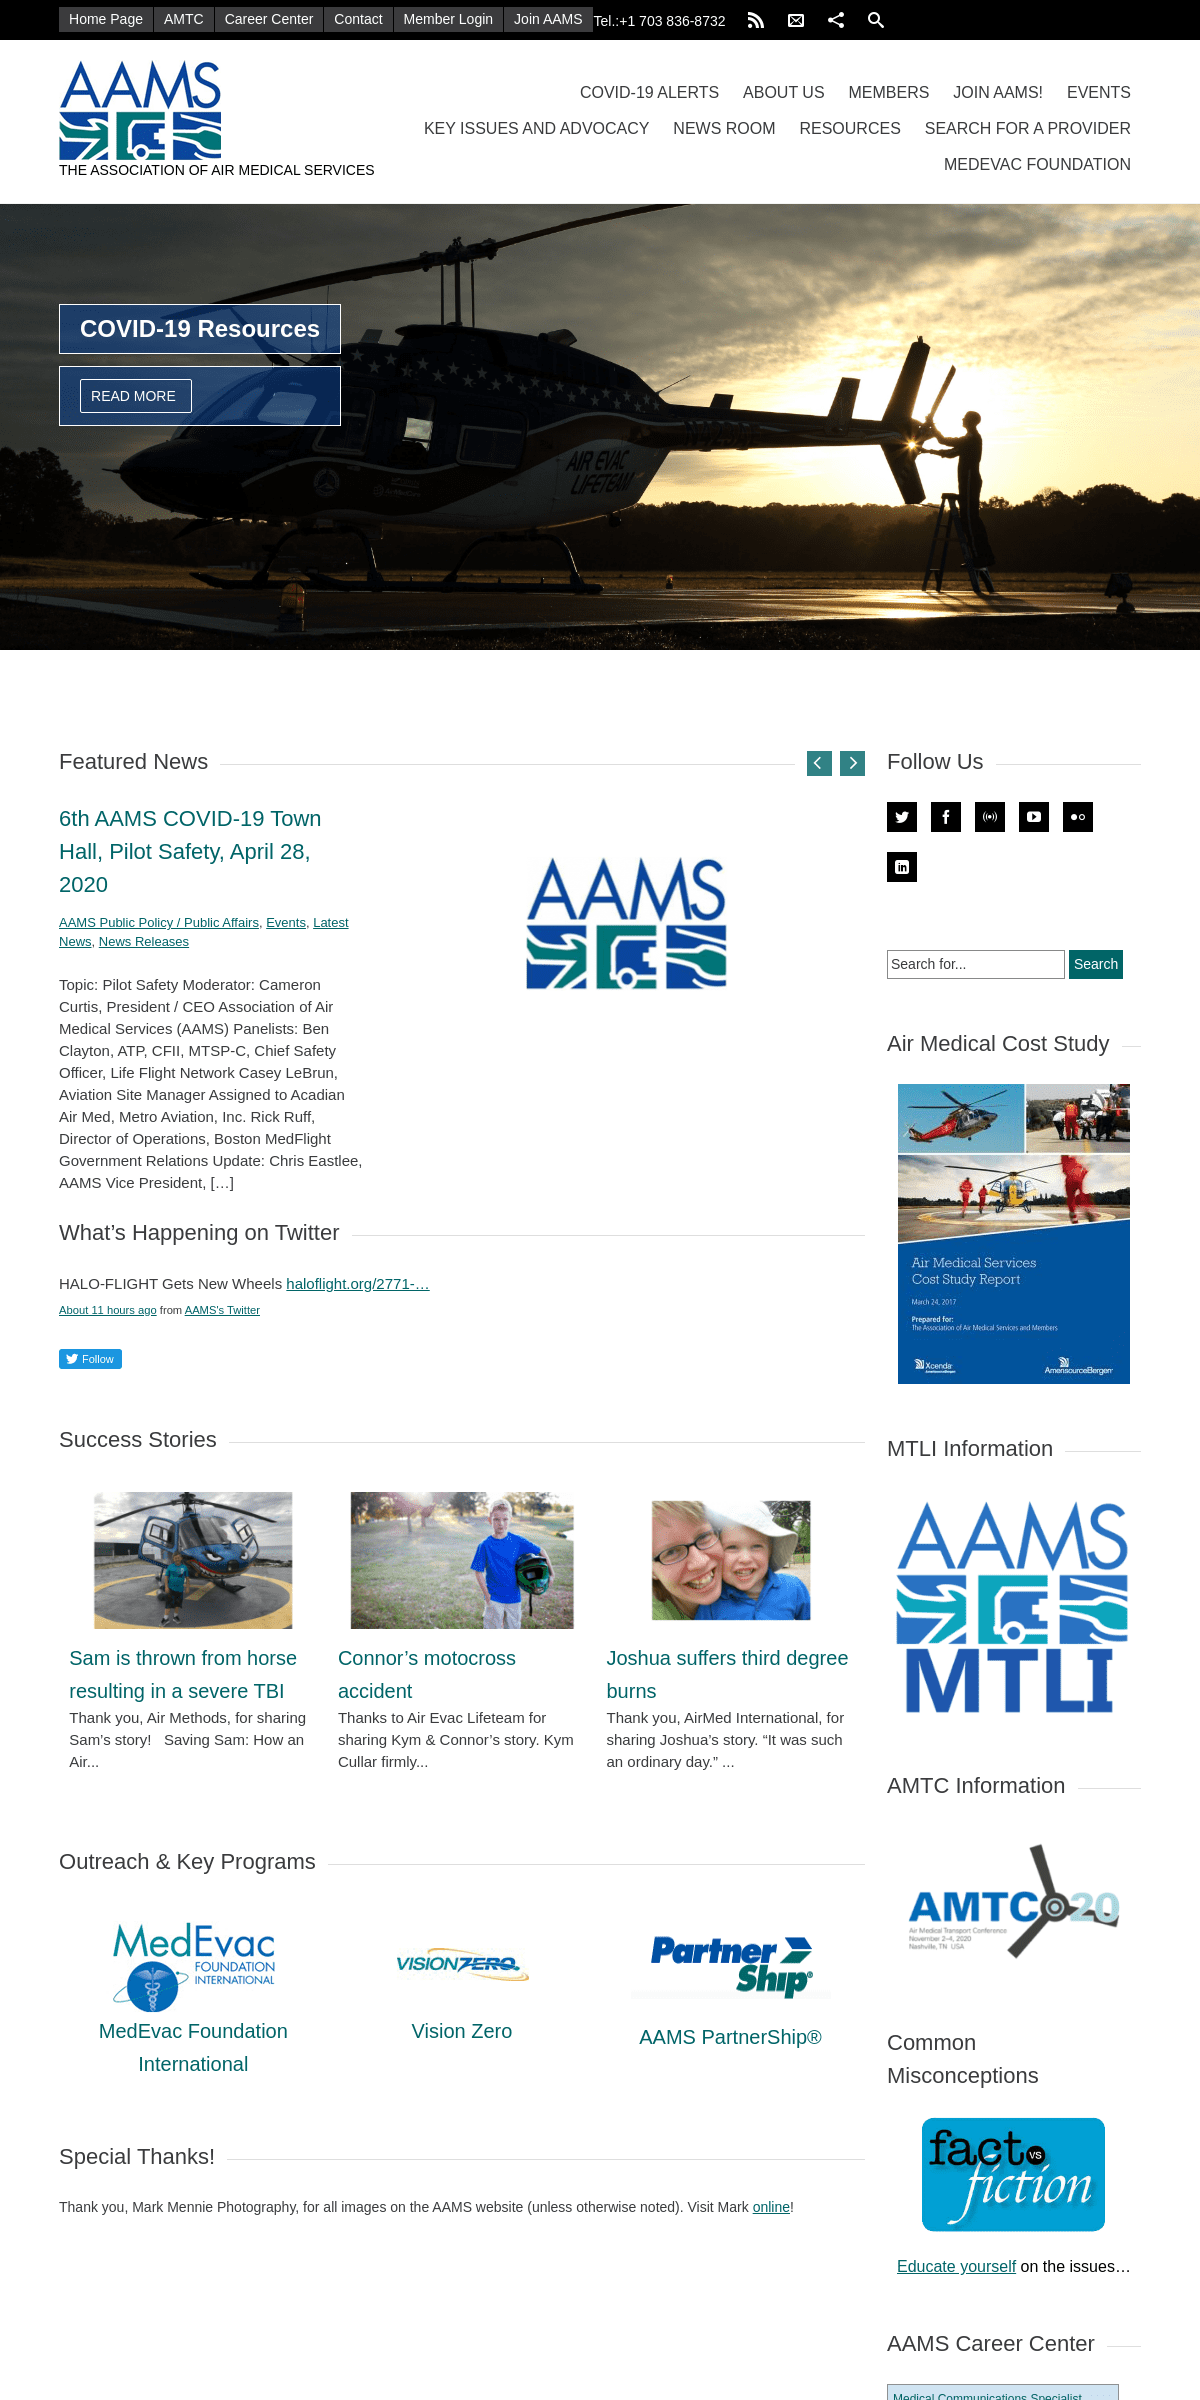 A complete backup of aams.org